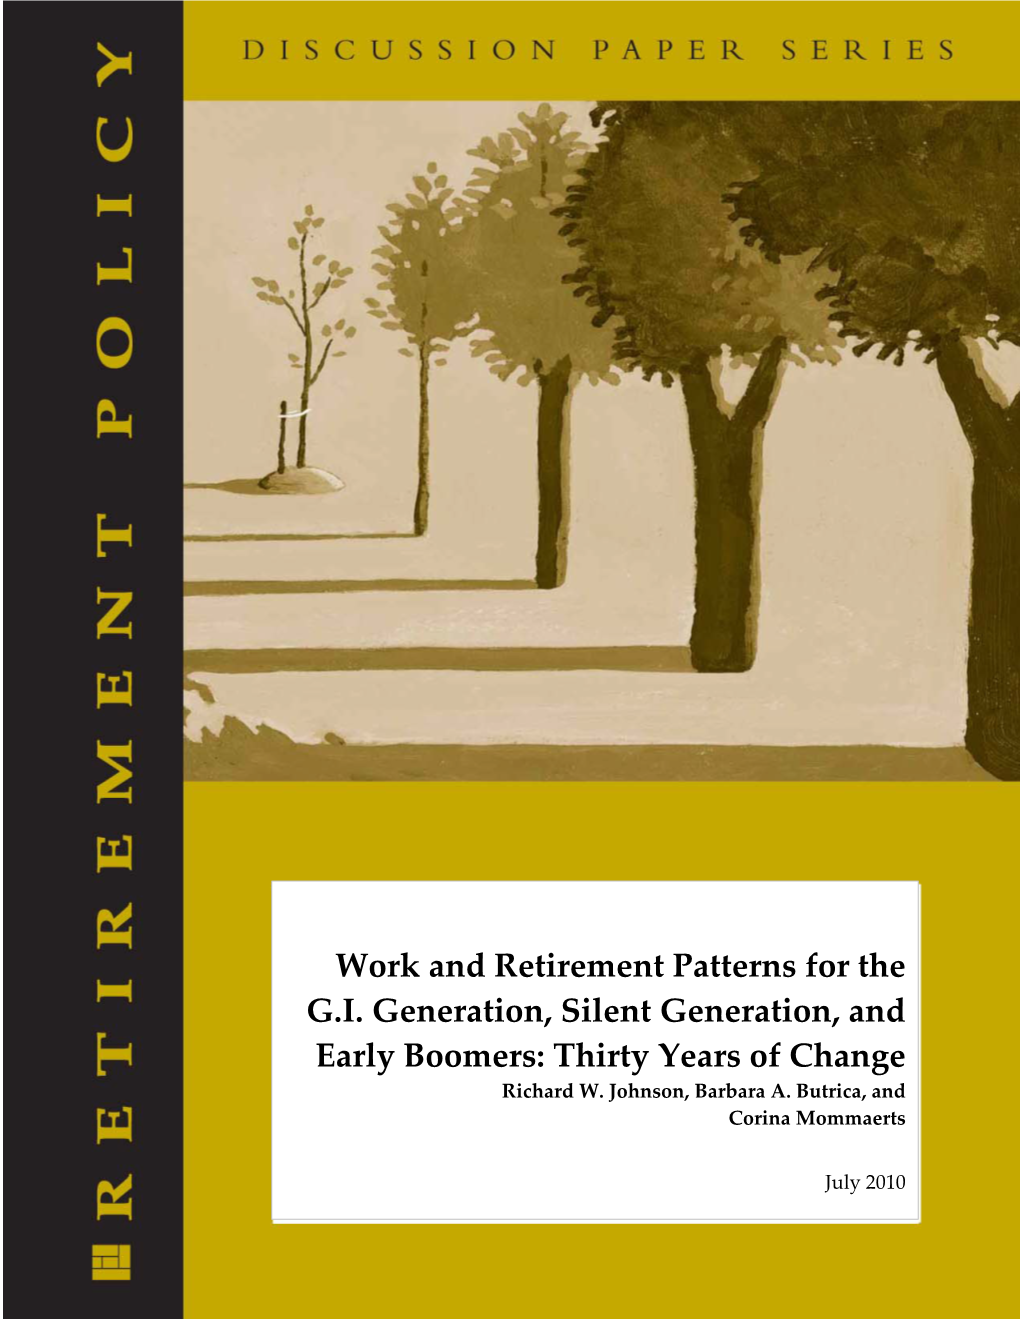 Work and Retirement Patterns for the G.I. Generation, Silent Generation, and Early Boomers: Thirty Years of Change Richard W